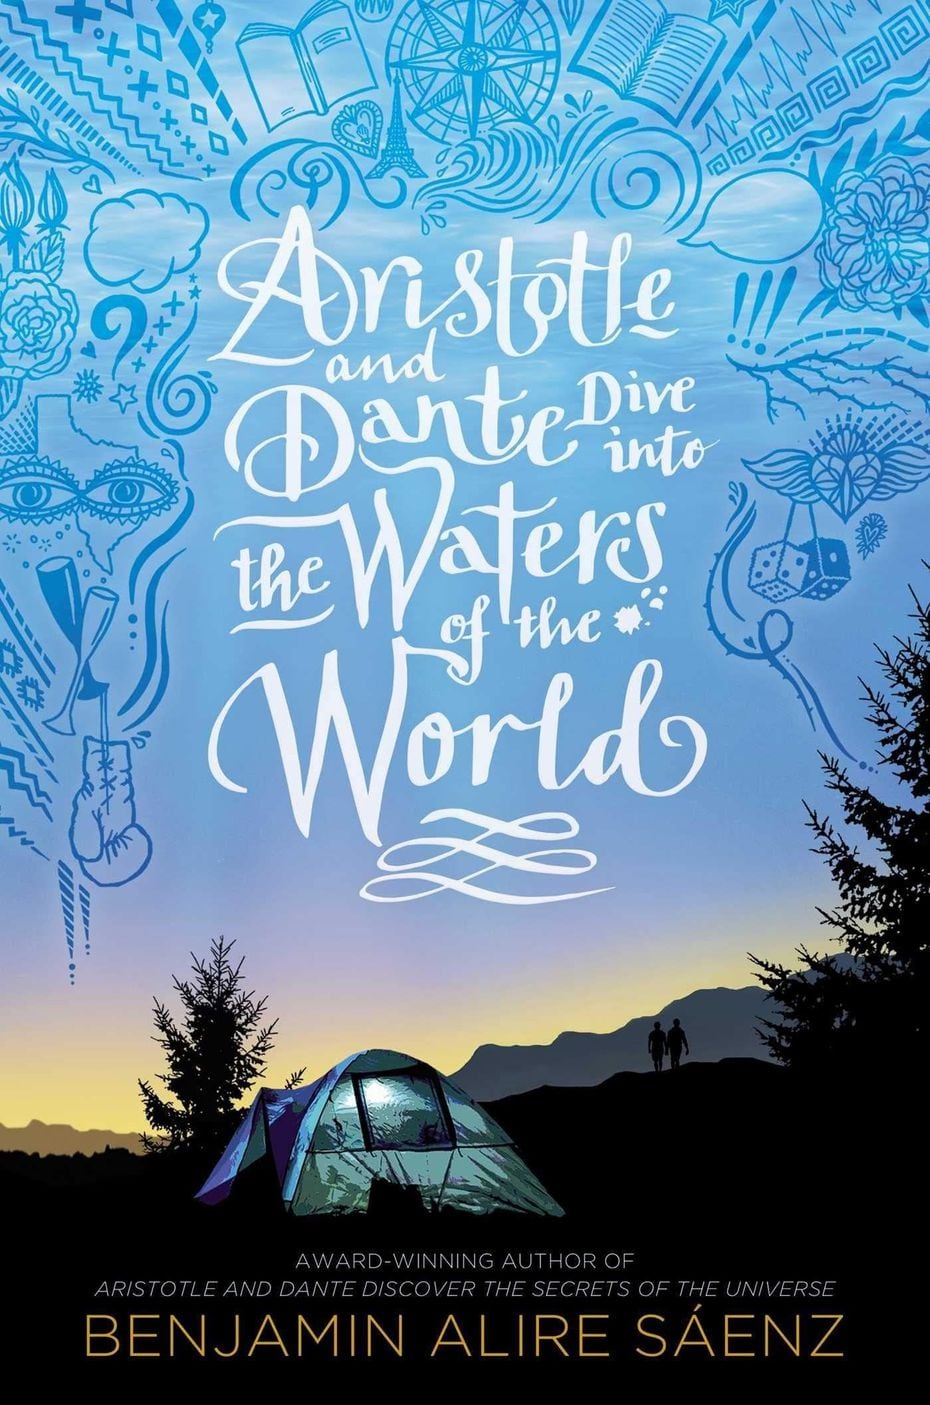 "Aristotle and Dante Dive into the Waters of the World" is the latest young adult novel by...